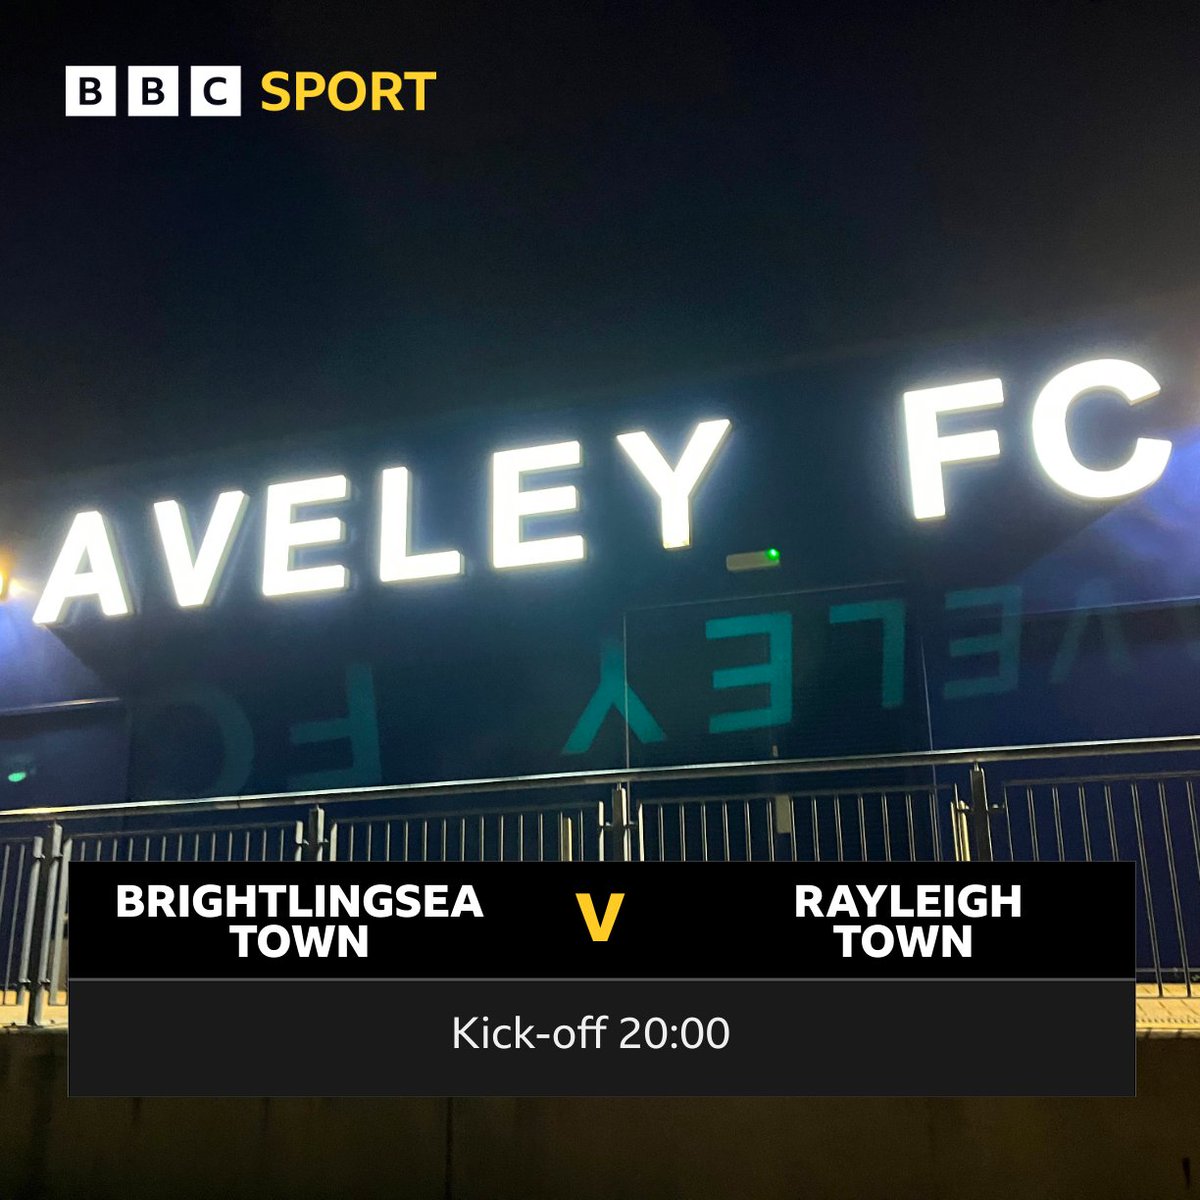 It's the @BBCEssex Saturday Premier Cup Final tonight. @FcBrightlingsea face @RayleighTownFC1 at Aveley's Parkside stadium for an 8pm kick-off.